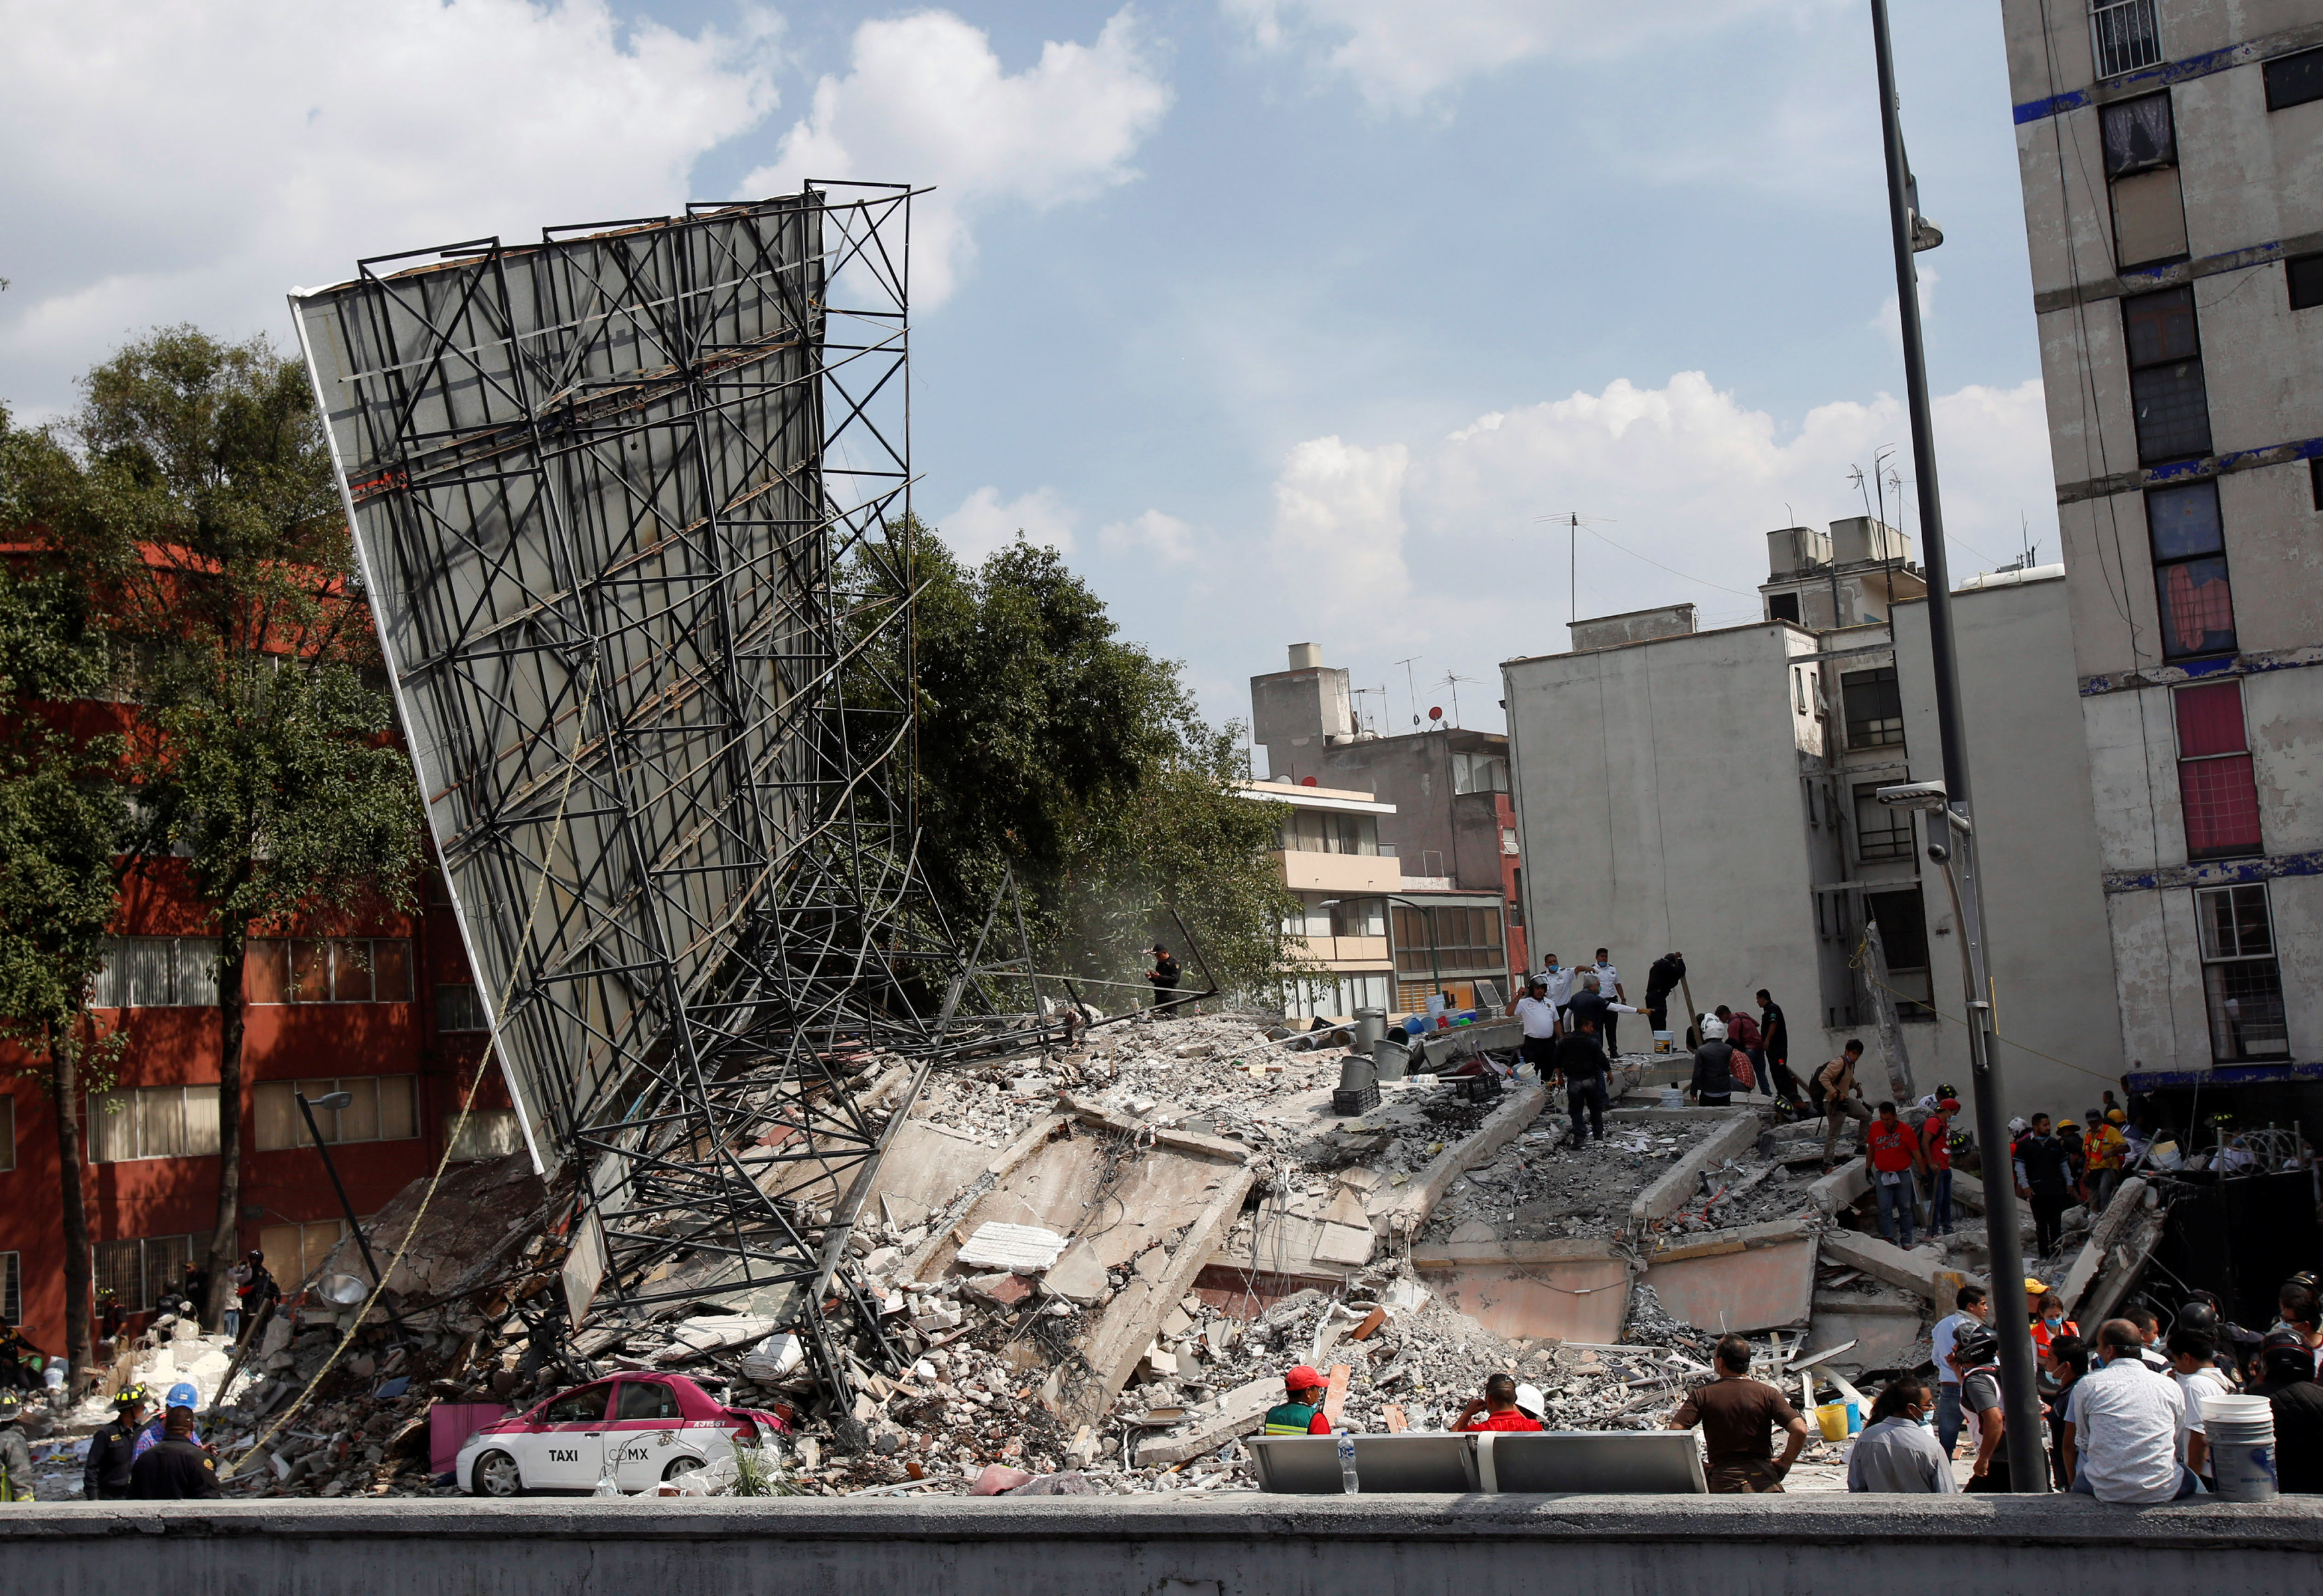 A collapsed building is seen after an earthquake in Mexico City, Mexico September 19, 2017. REUTERS/Ginnette Riquelme